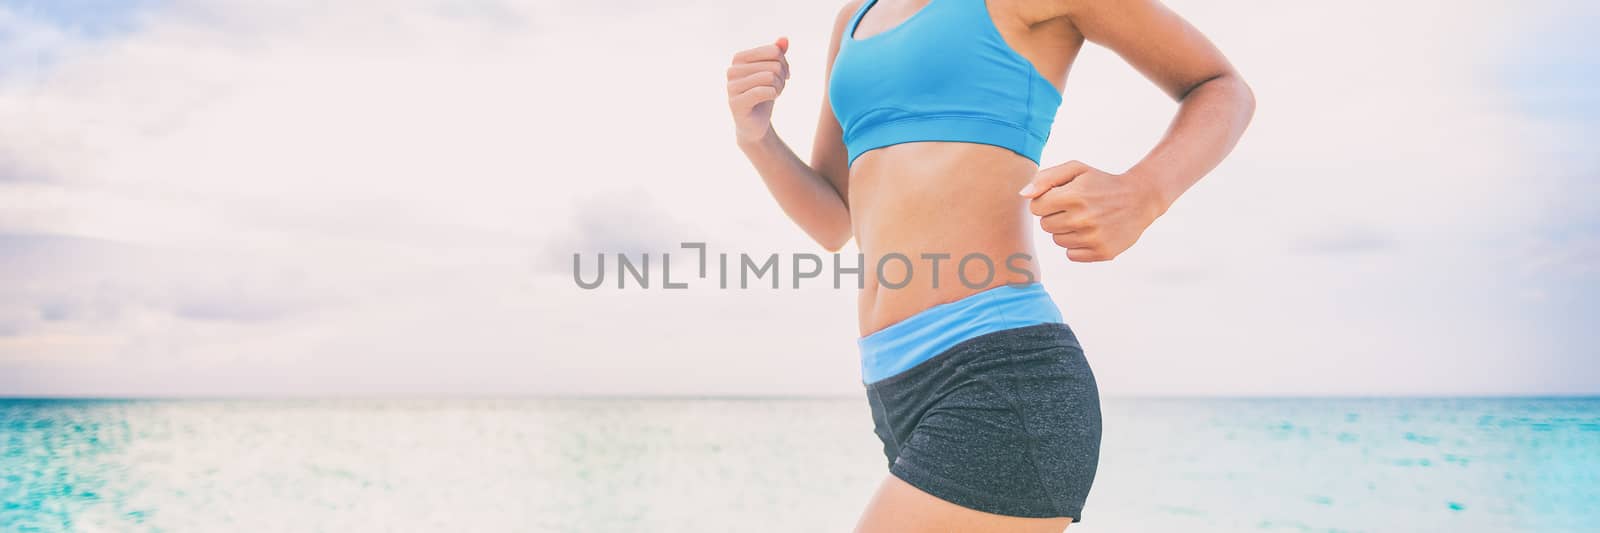 Fitness athlete woman runner running training outside jogging on beach. Active healthy lifestyle fit people banner panorama. Stomach lower body for fat burning weight loss treatment.